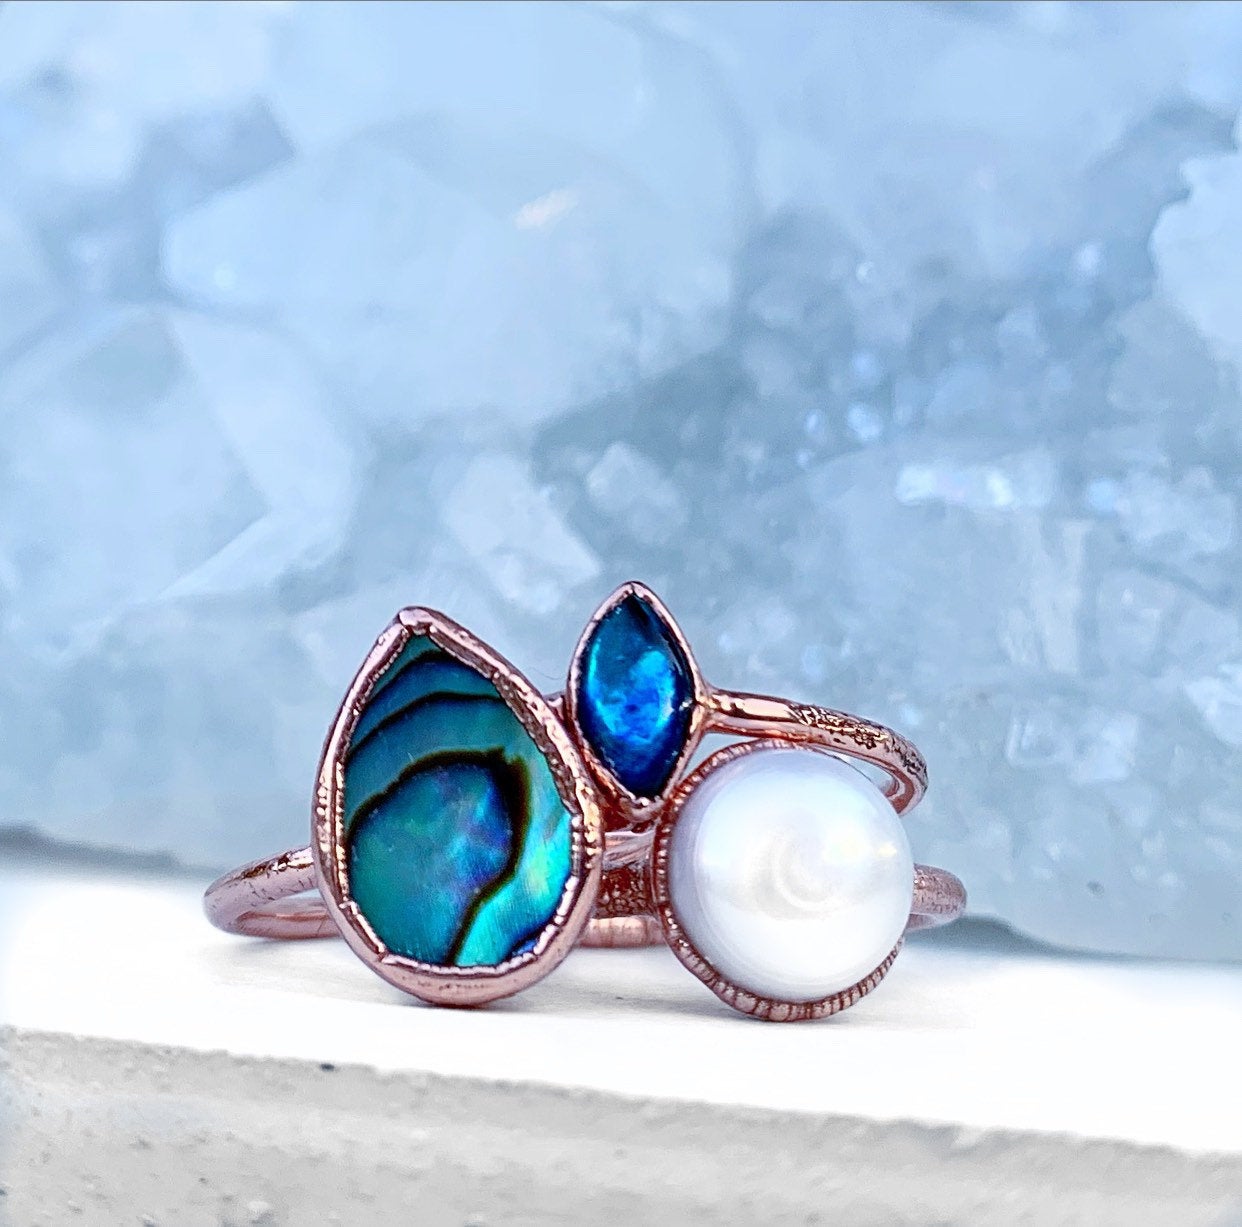 Teardrop Abalone Shell Ring, Alternative Pisces Birthstone Ring, Flashy Abalone Shell Ring, Beachy Style Statement Ring, Beachy Boho Jewelry